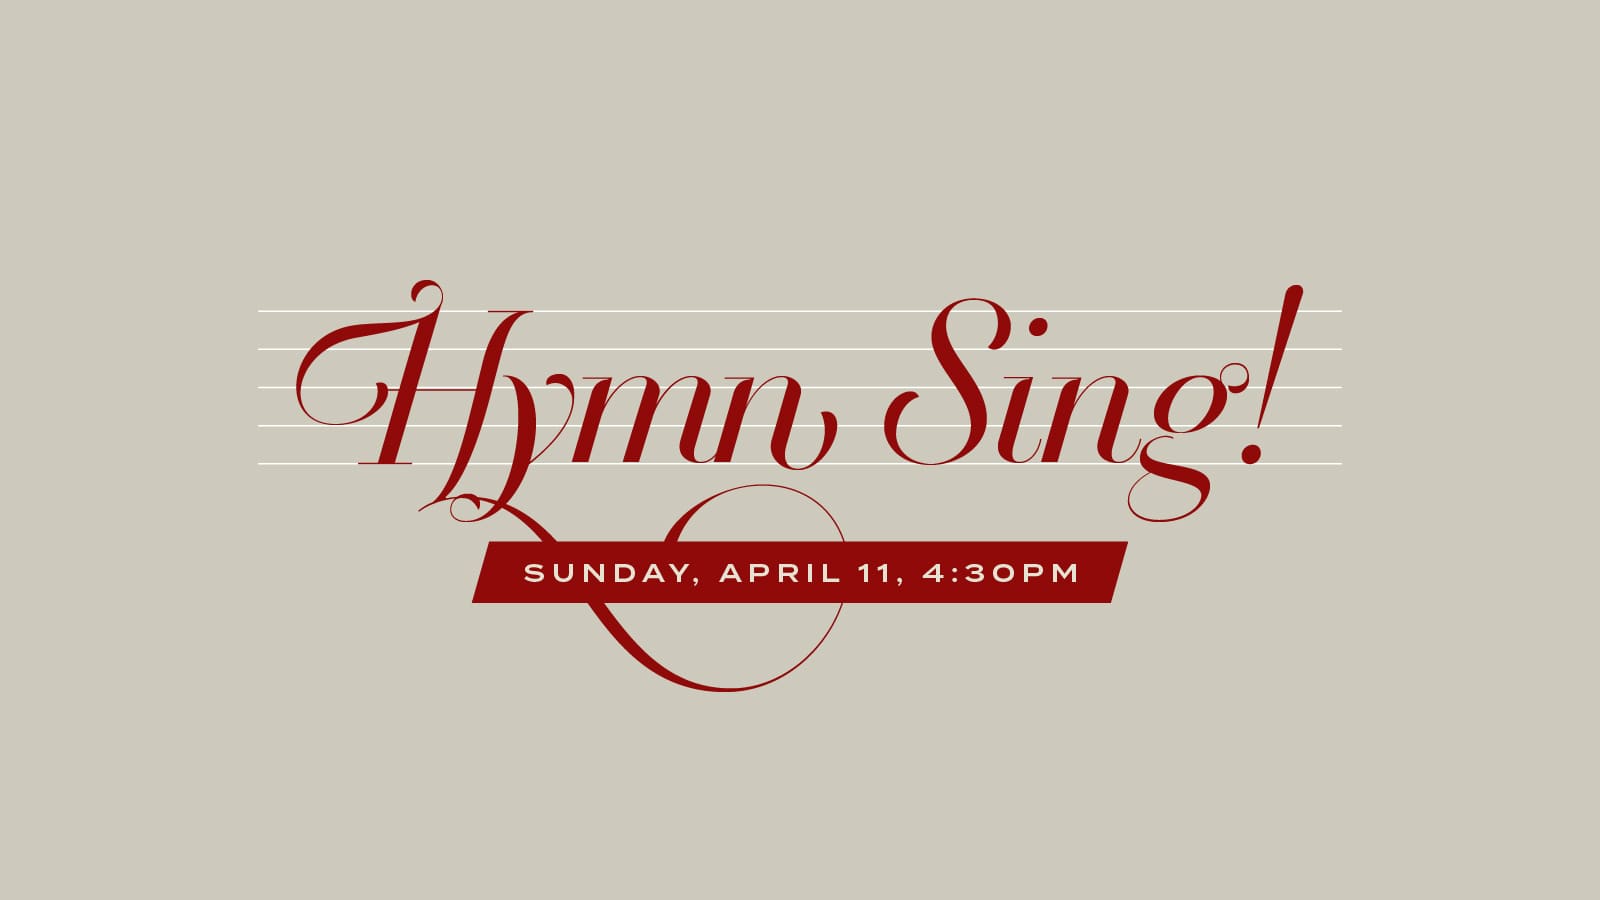 Our Plans for Singing on Sunday, April 11